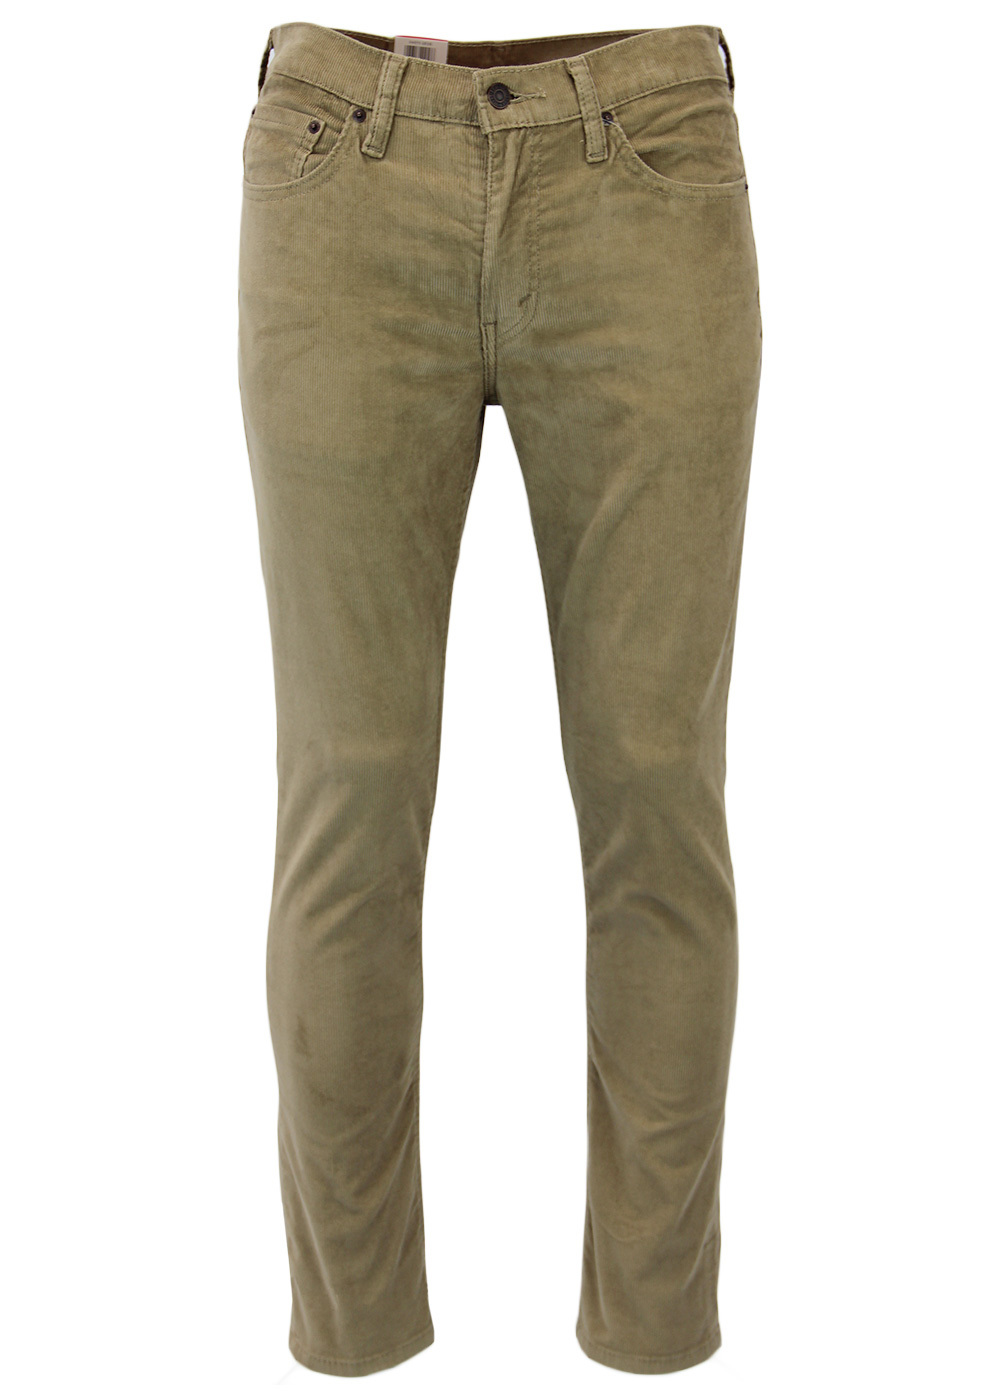 LEVI'S® 511 Retro Mod 1960s Slim Fit Cord Jeans in Sand